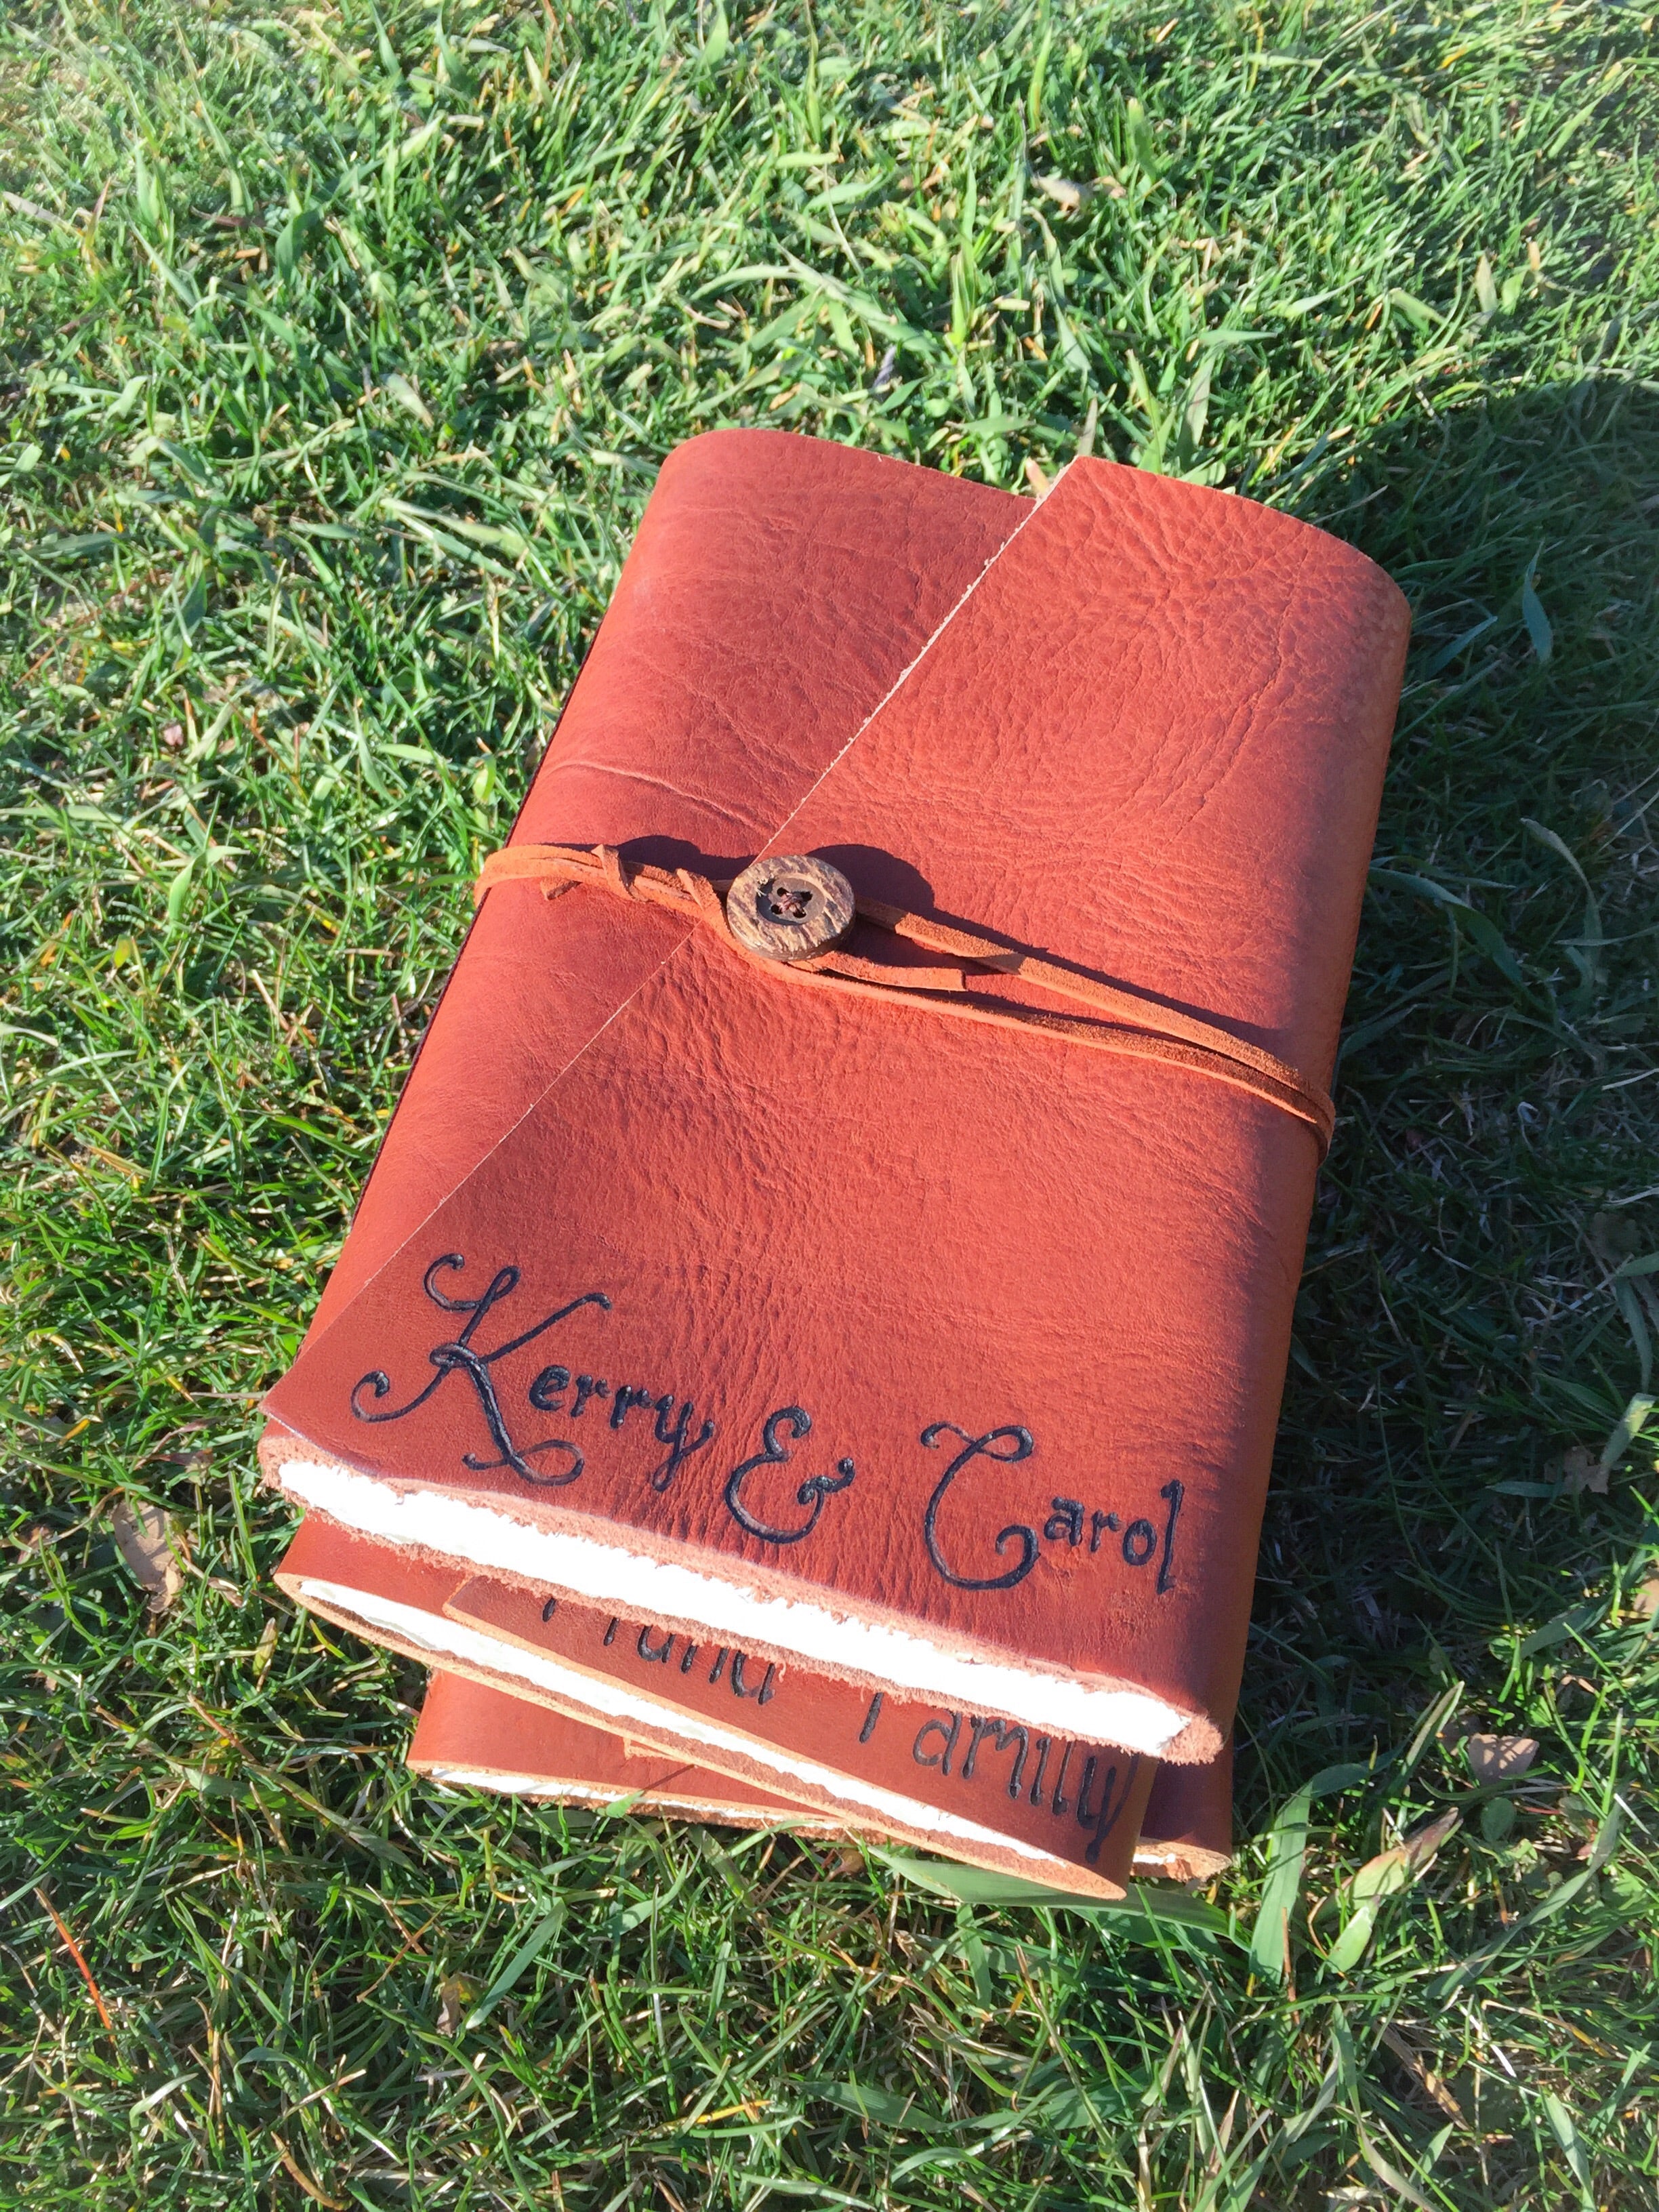 Rustic Leather Journals